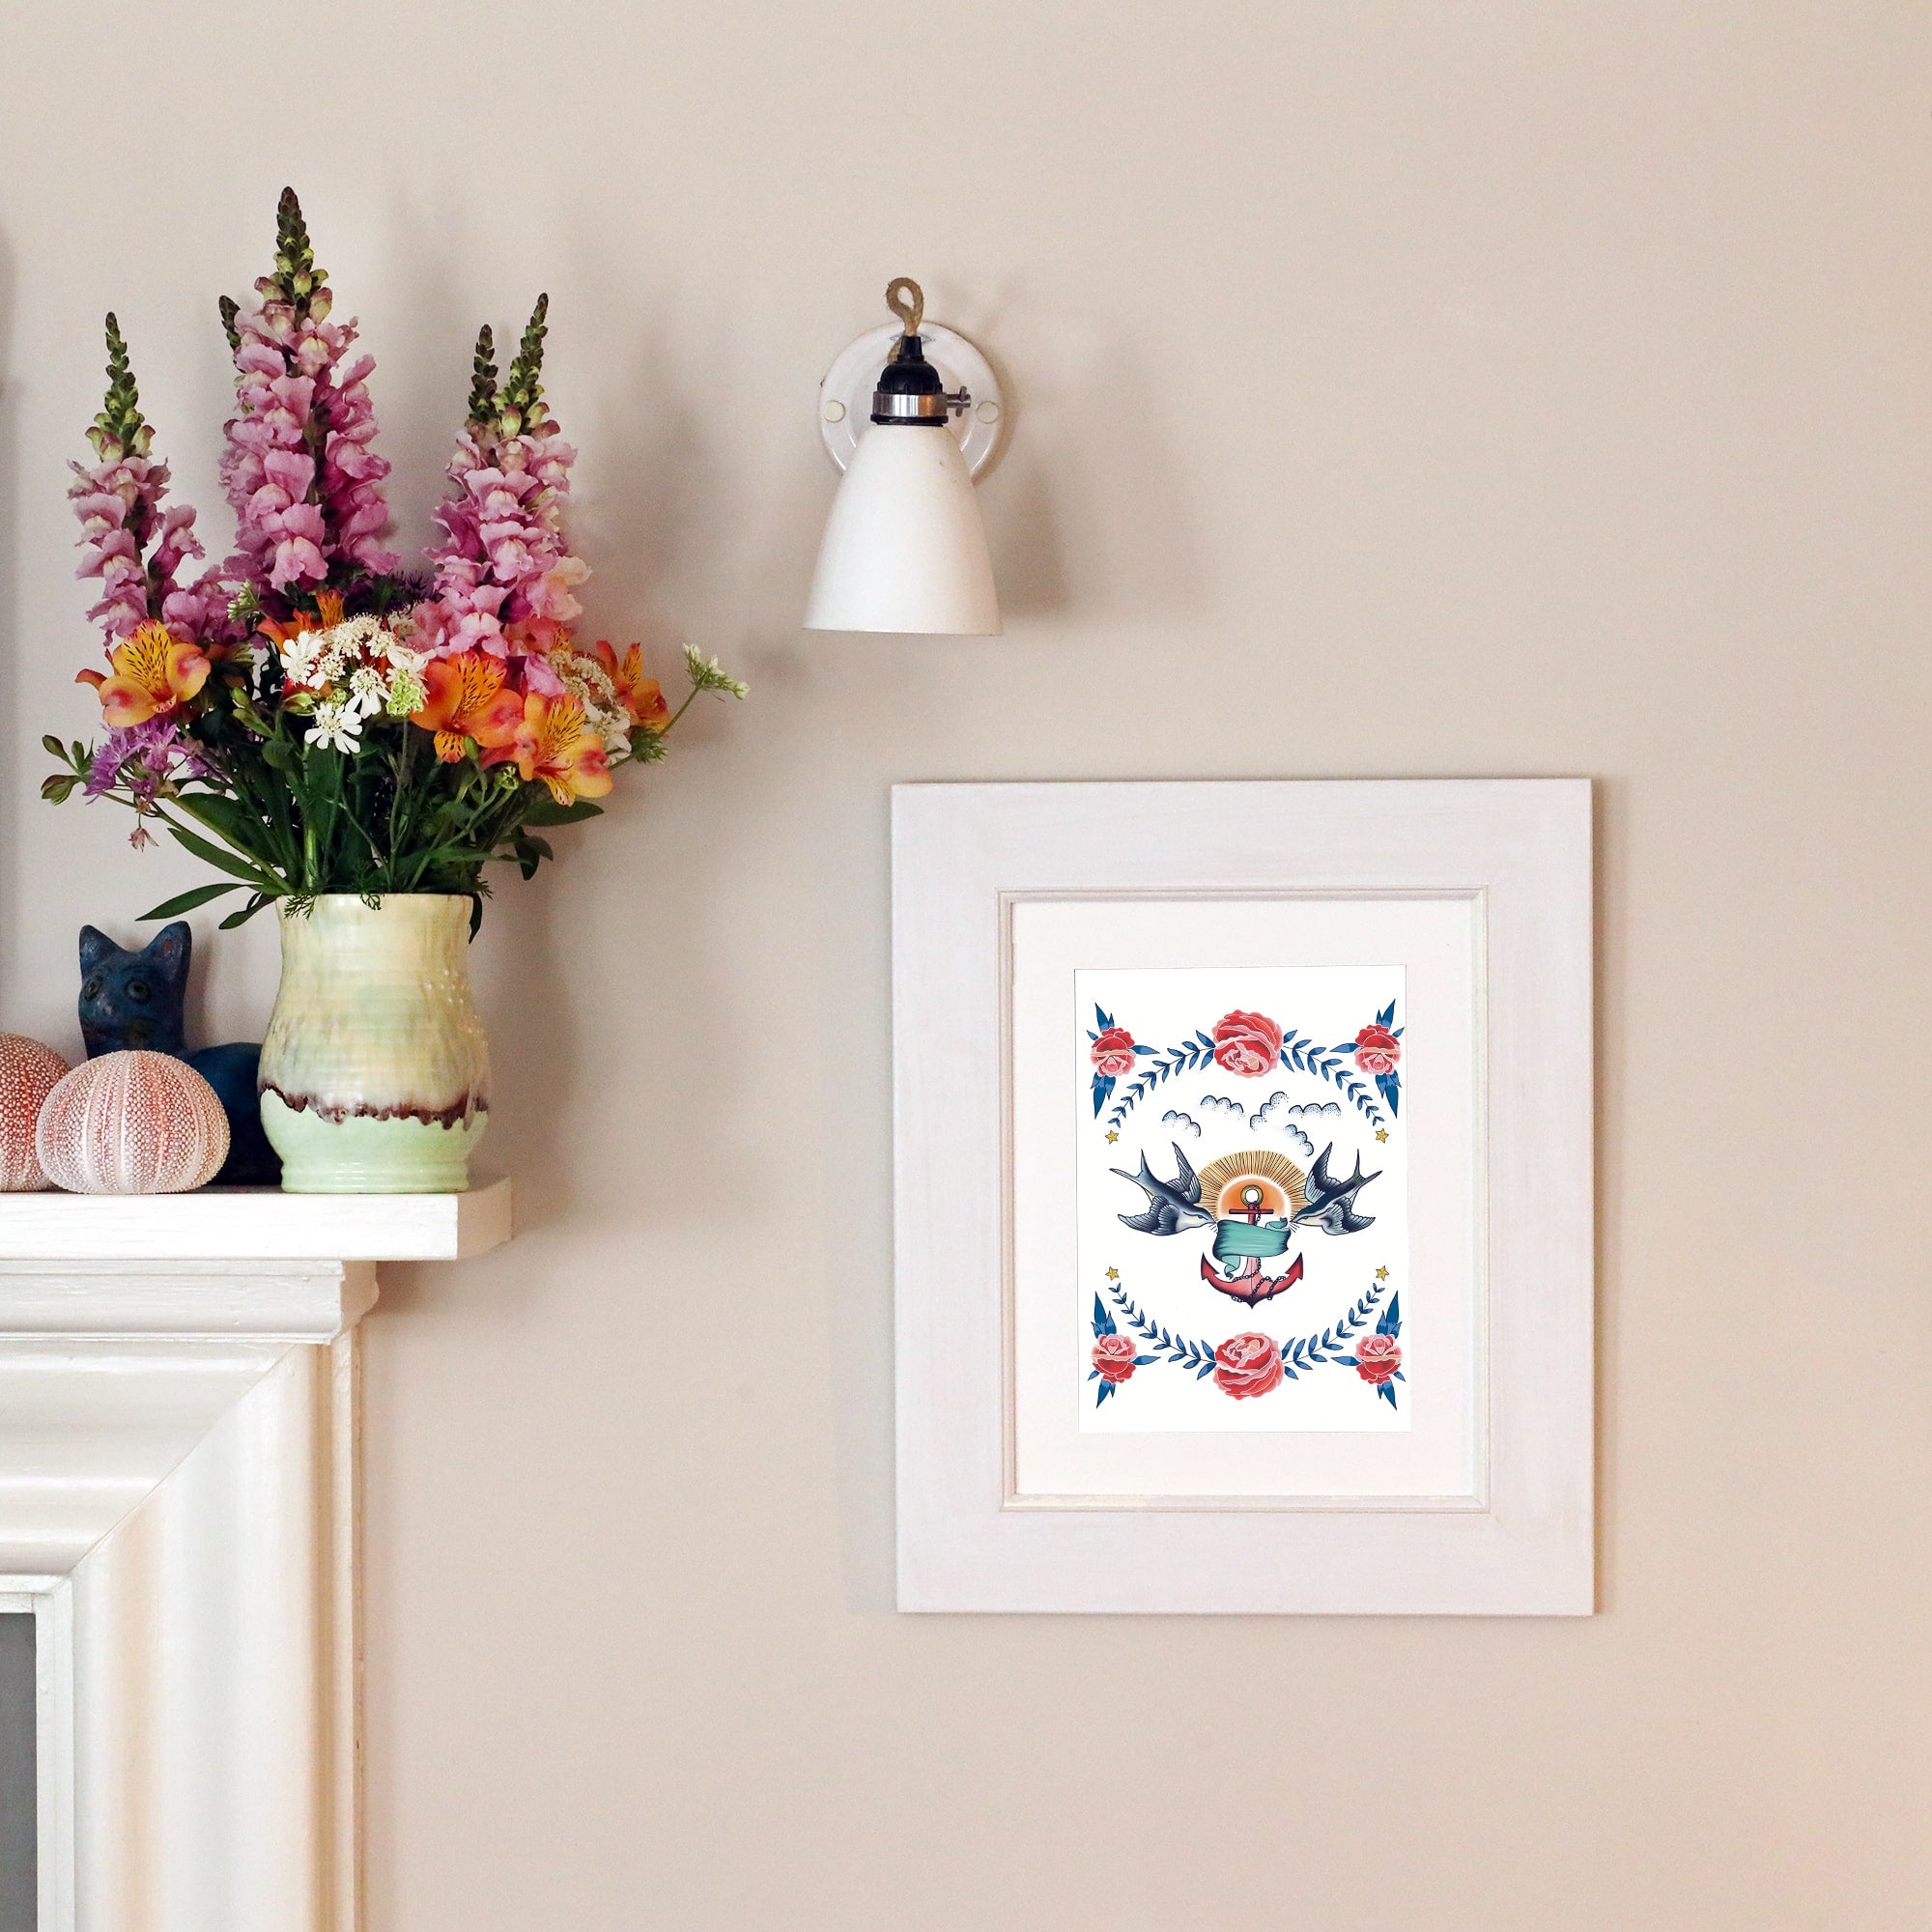 Swallows & Anchor Art Print In Three Sizes - A4, A3 And A2